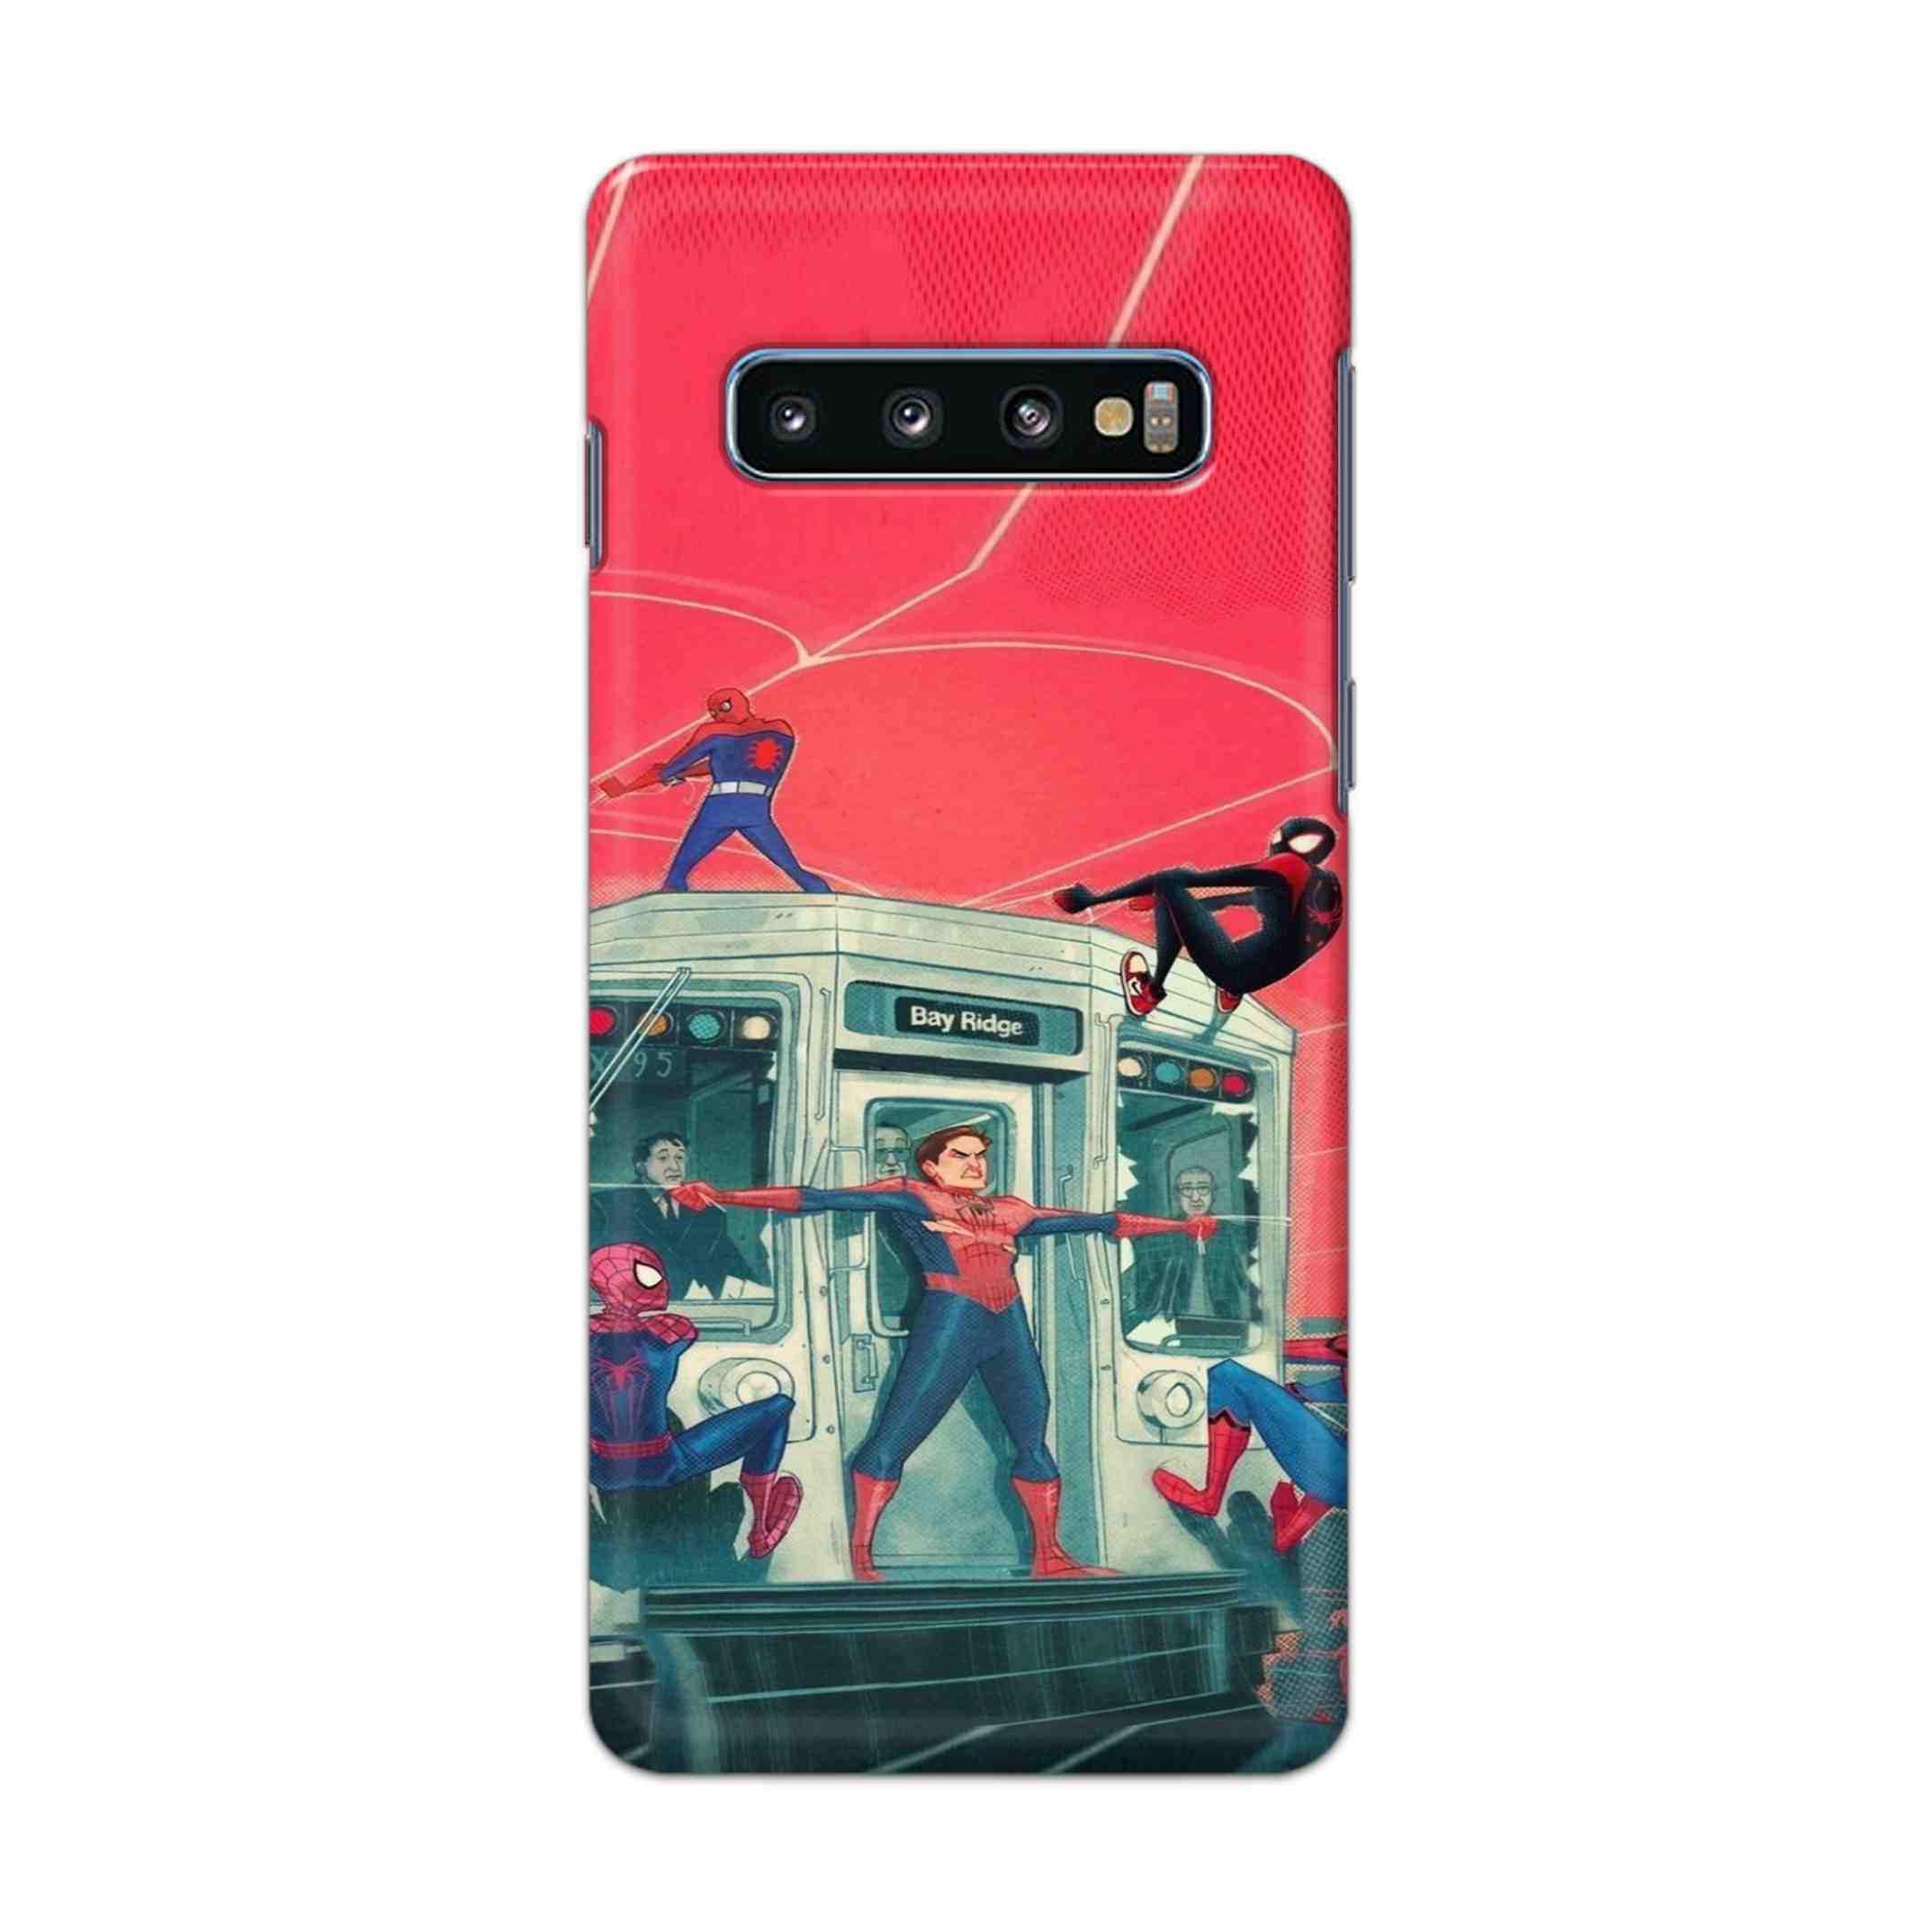 Buy All Spiderman Hard Back Mobile Phone Case Cover For Samsung Galaxy S10 Plus Online